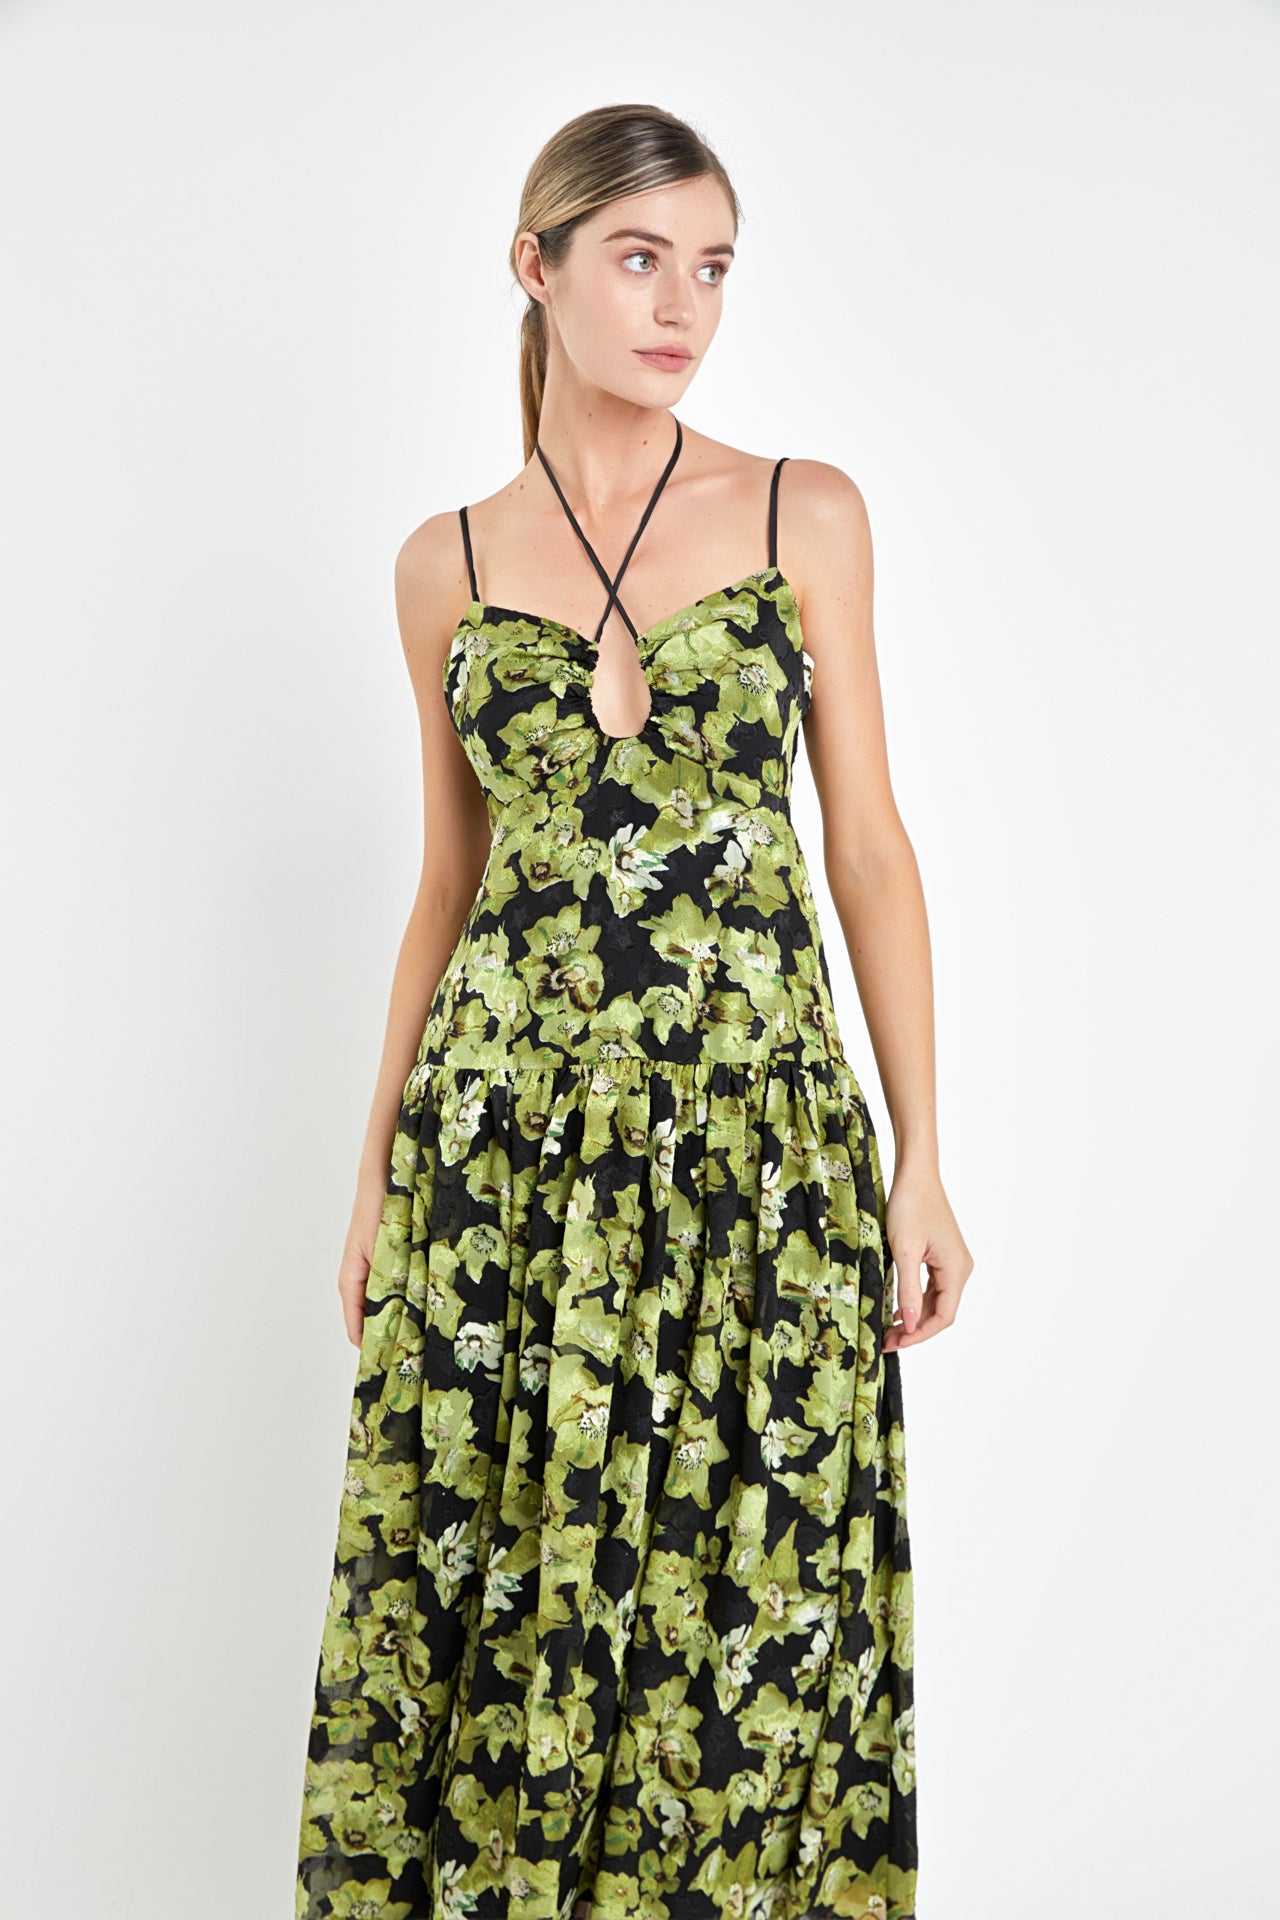 ENDLESS ROSE - Front Cutout Floral Maxi Dress - DRESSES available at Objectrare